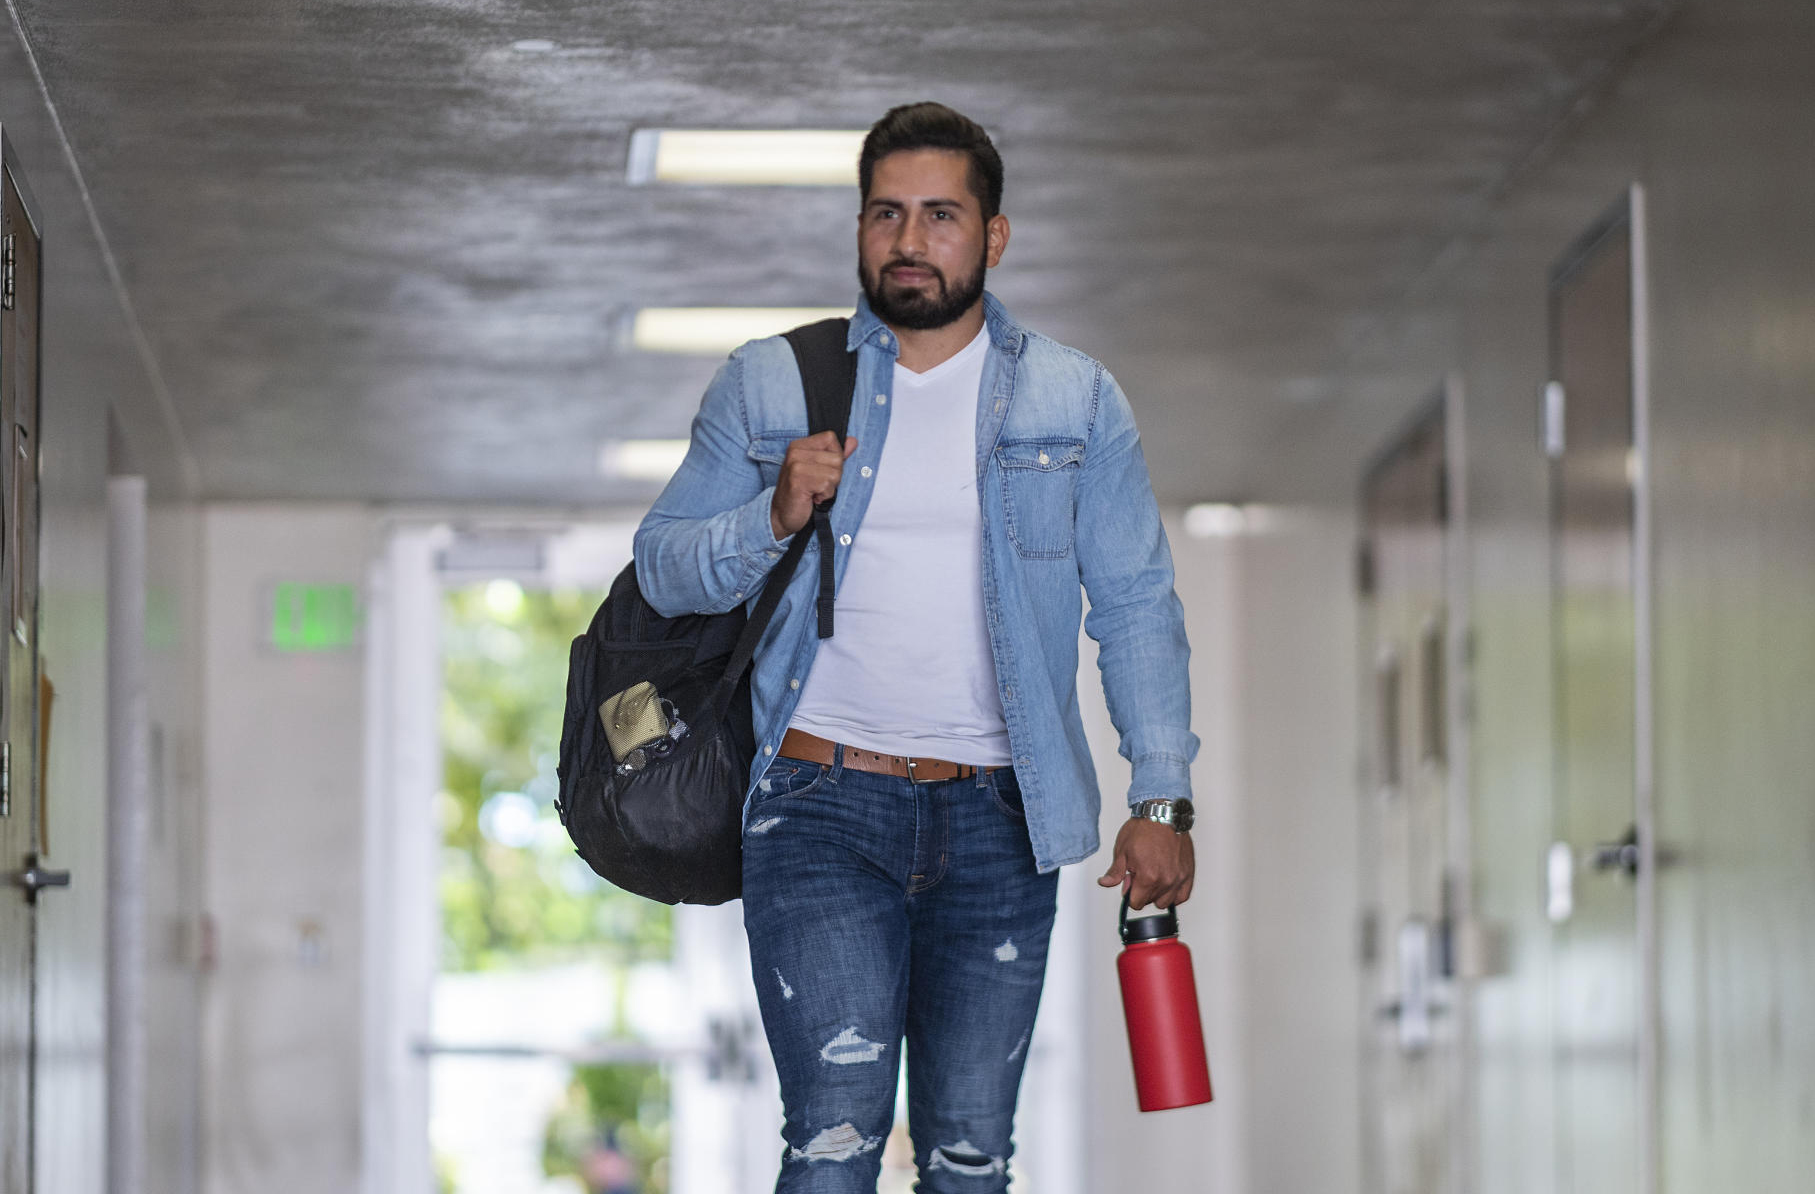 Jaime Valdovinos walks through an outdoor hallway on campus carrying his back and reusable water bottle